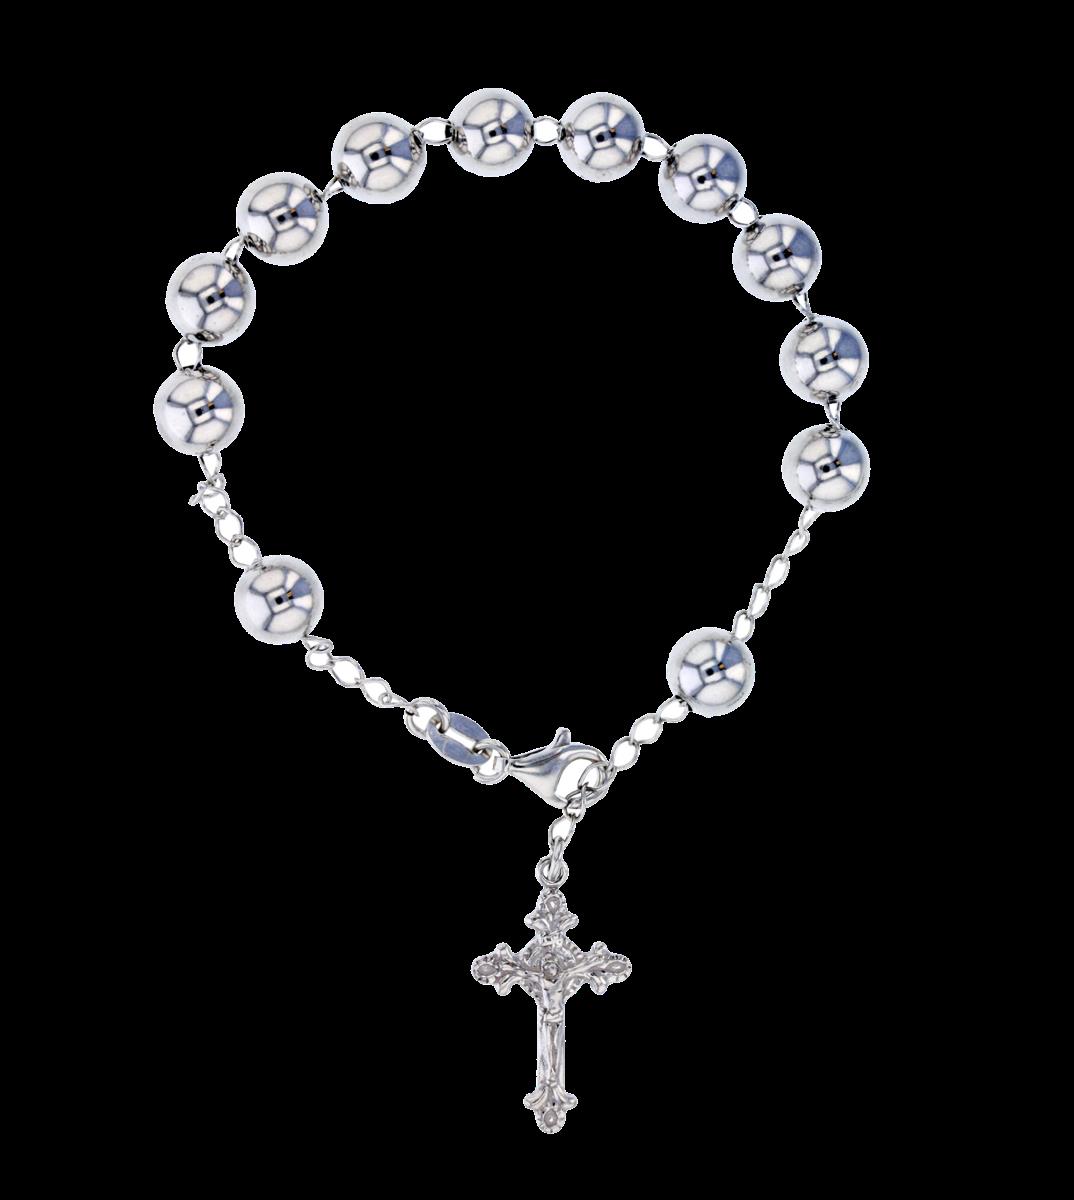 Sterling Silver Rhodium 25x15mm Crucifix Charm & Beads on Chain 8"Rosary Bracelet